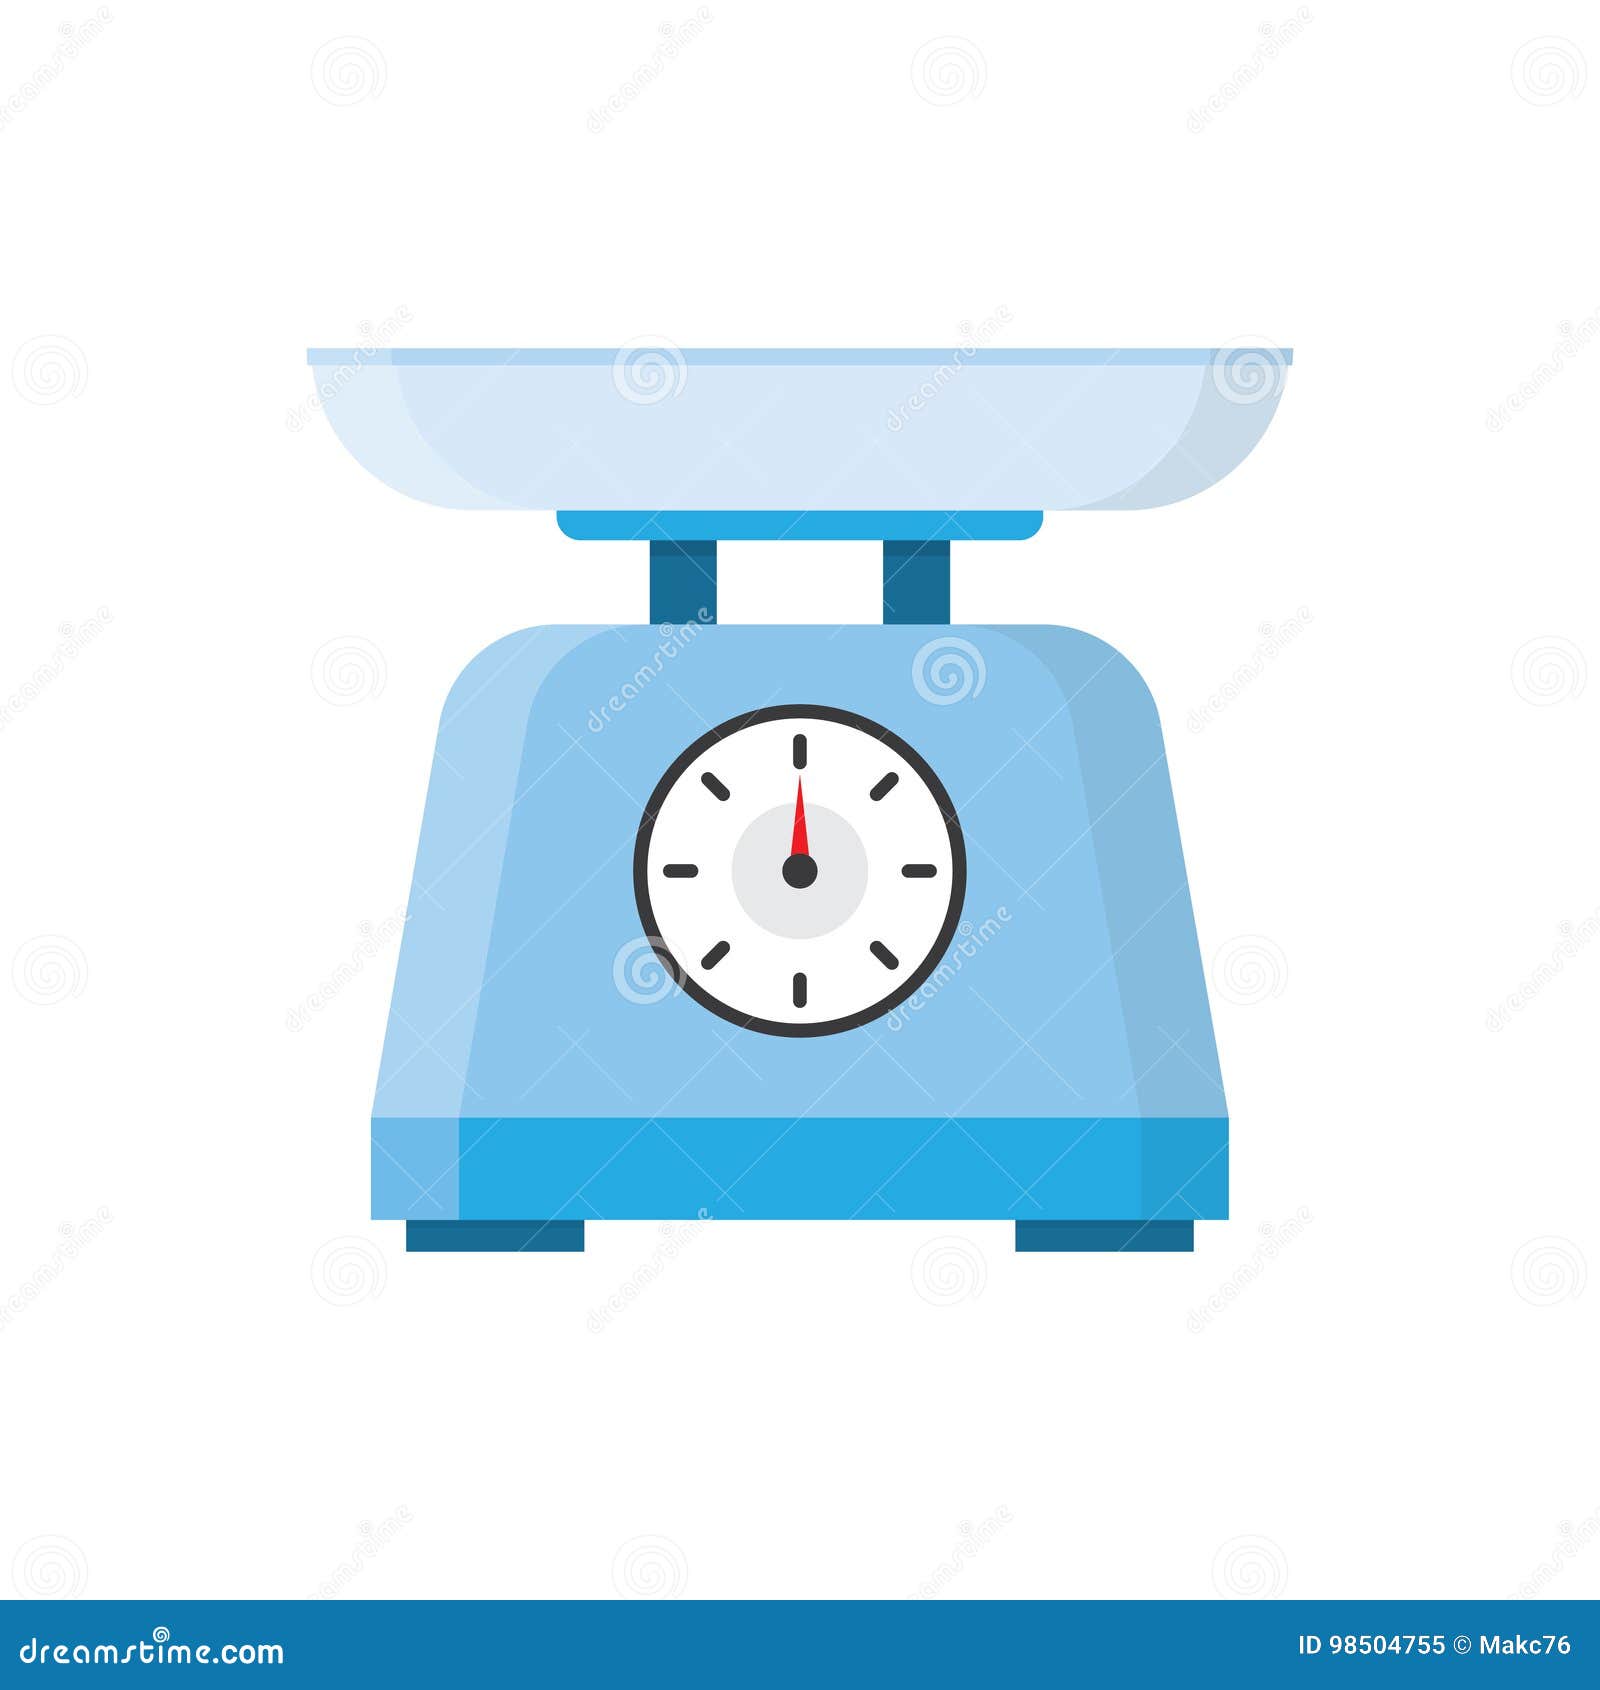 https://thumbs.dreamstime.com/z/kitchen-scale-bowl-isolated-white-background-appliances-measuring-tool-vector-illustration-98504755.jpg